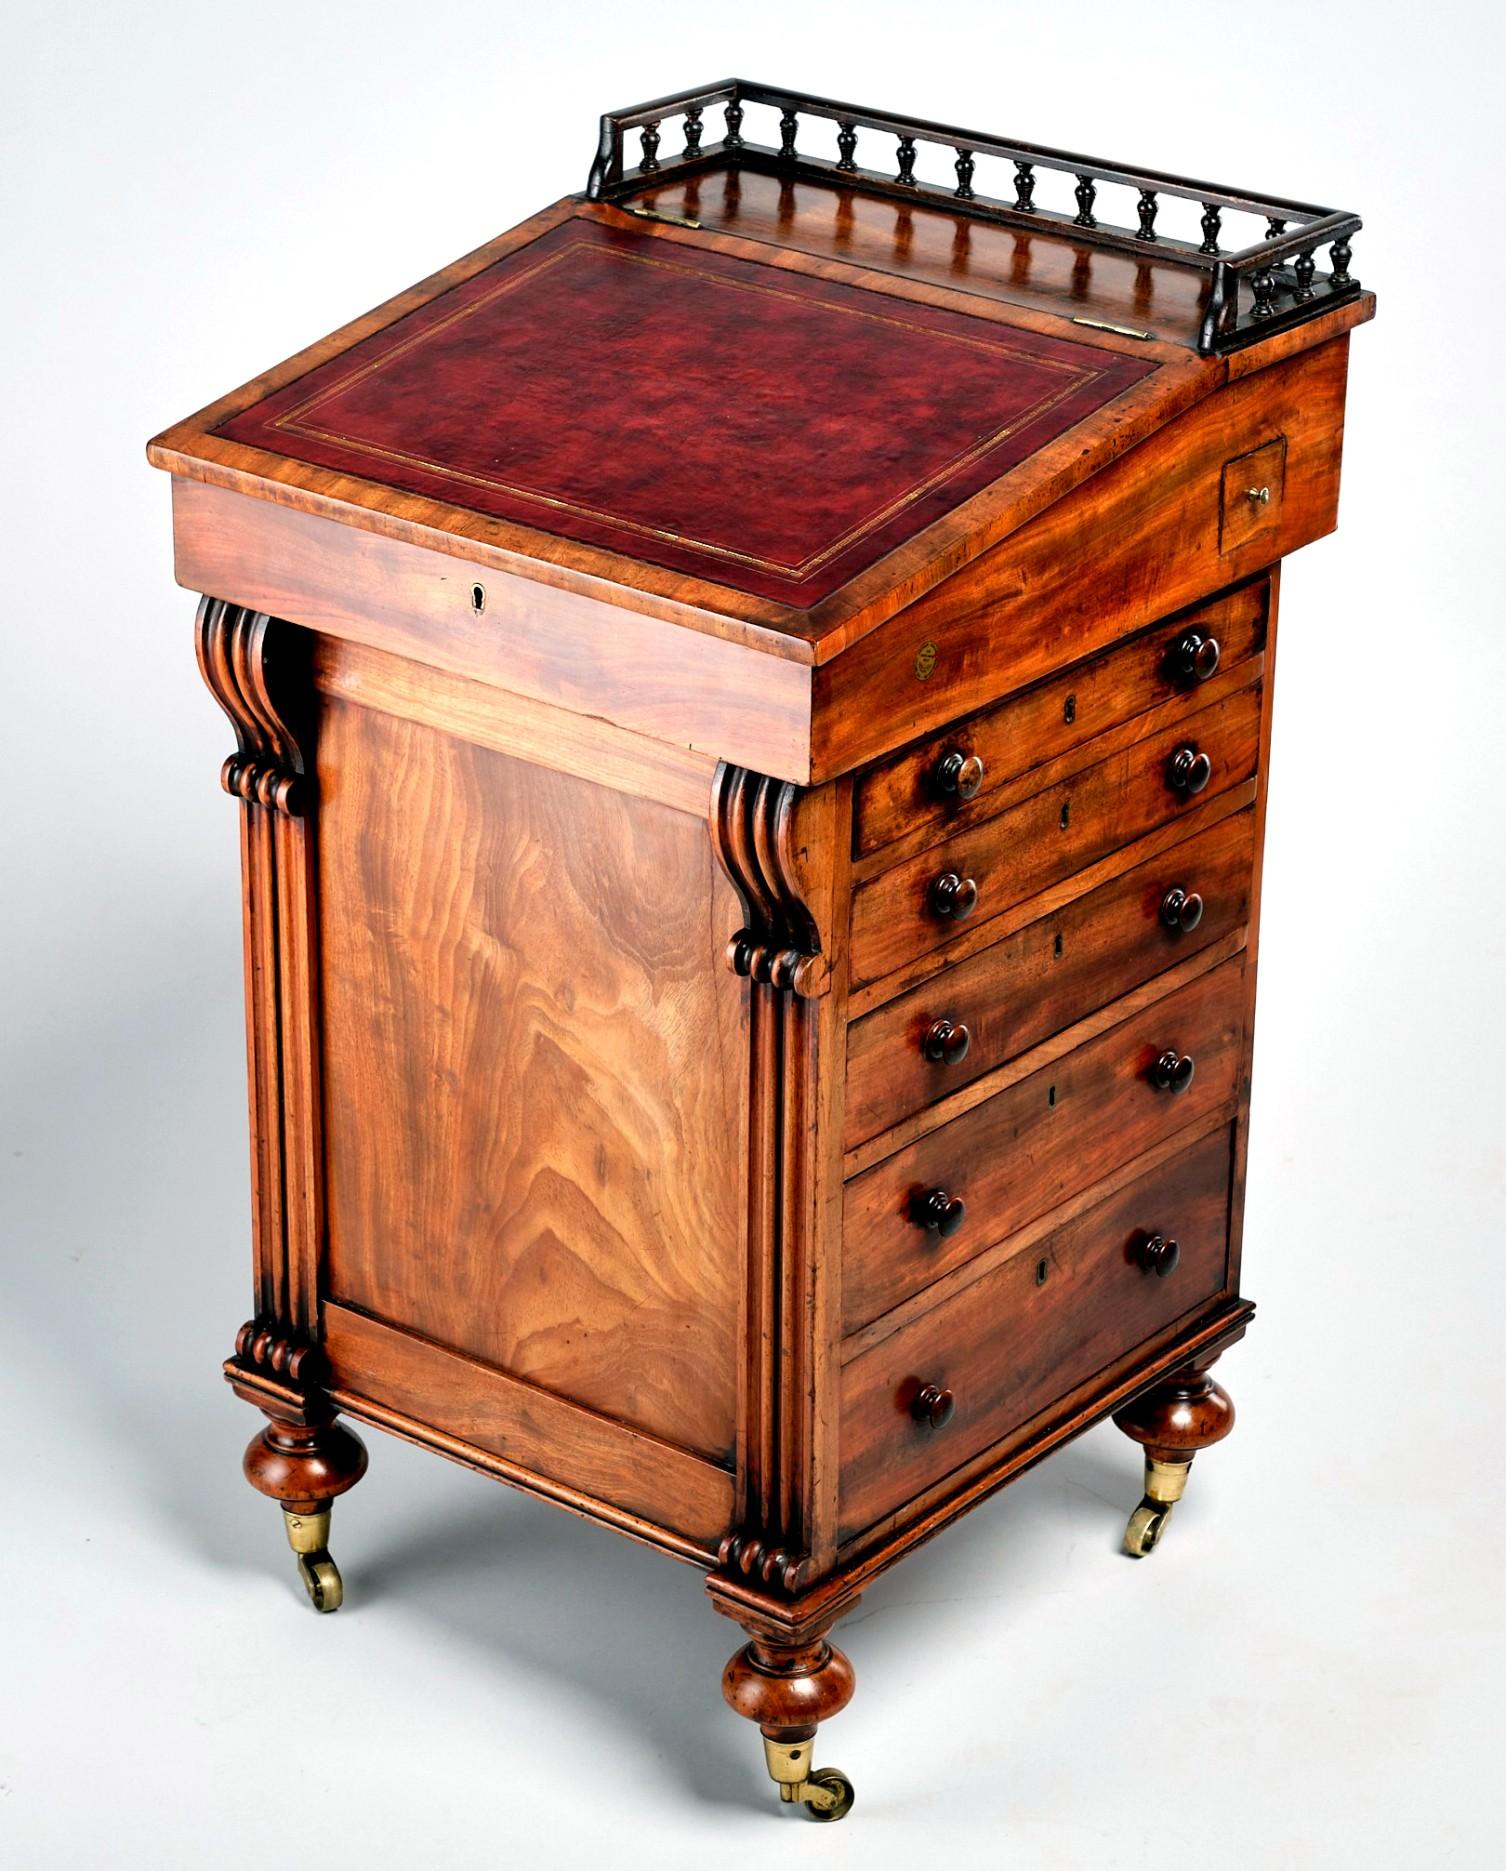 The richly figured mahogany case showing a finely turned baluster gallery over a hinged leather topped writing compartment, opening to an interior fitted with small drawers with satinwood fronts & turned pulls. 
The writing compartment having the